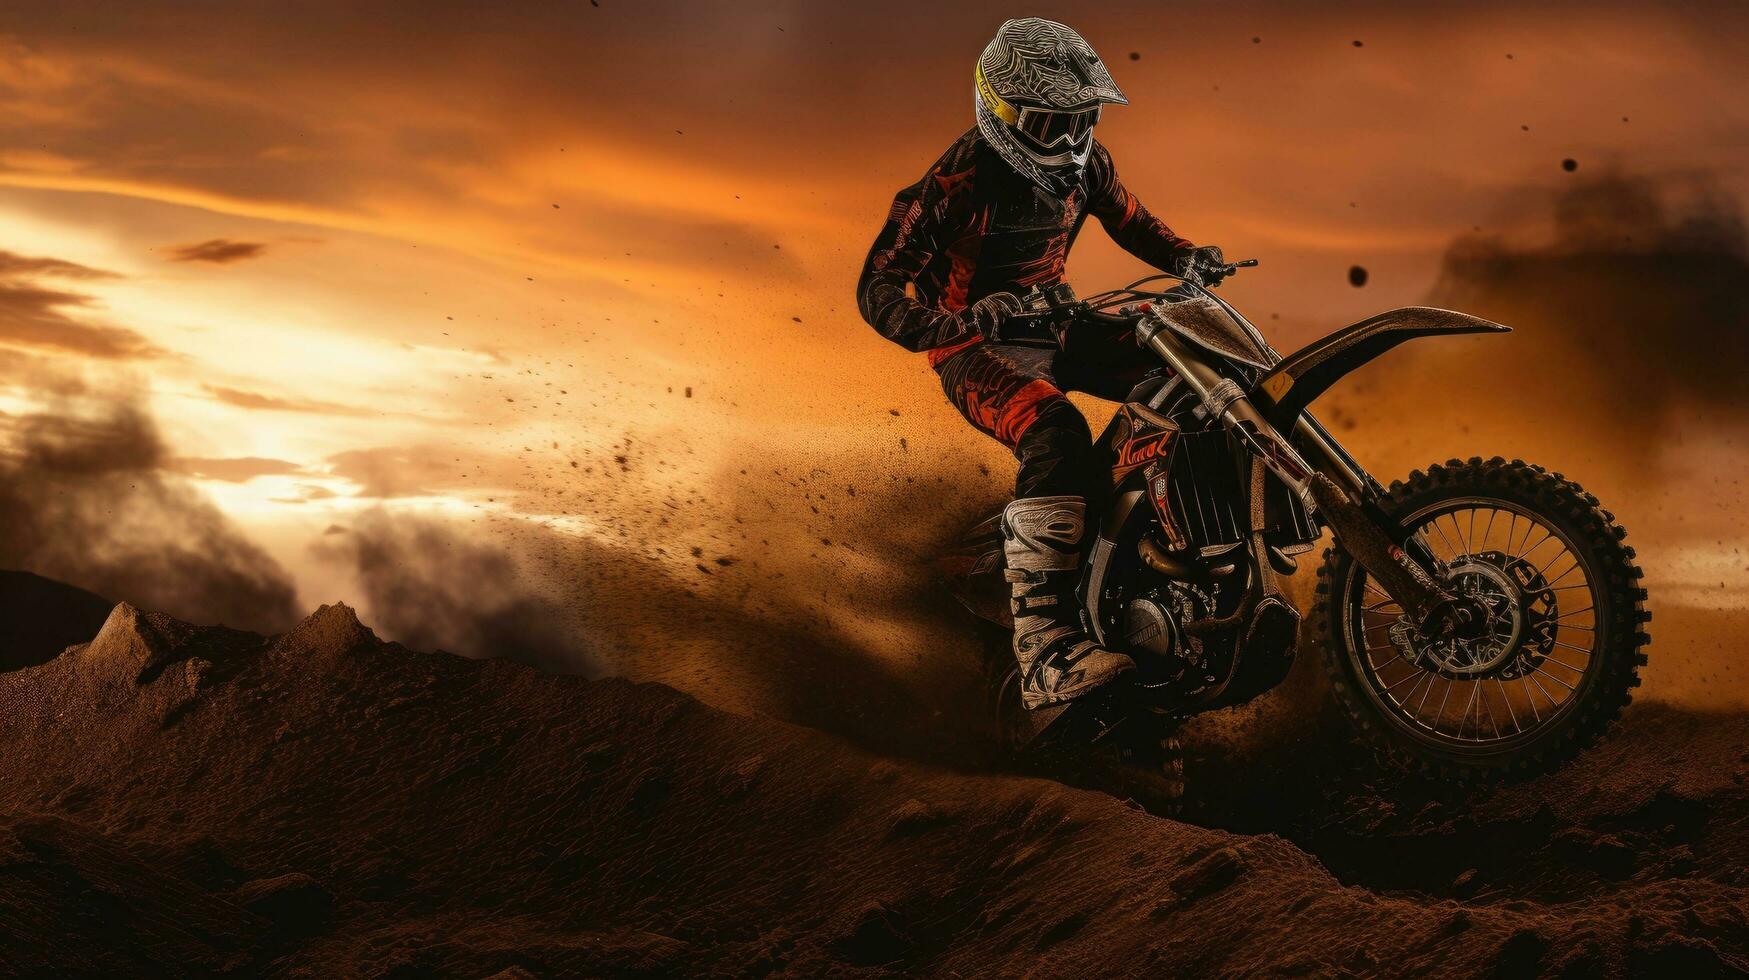 Motorcycle racer on sand photo